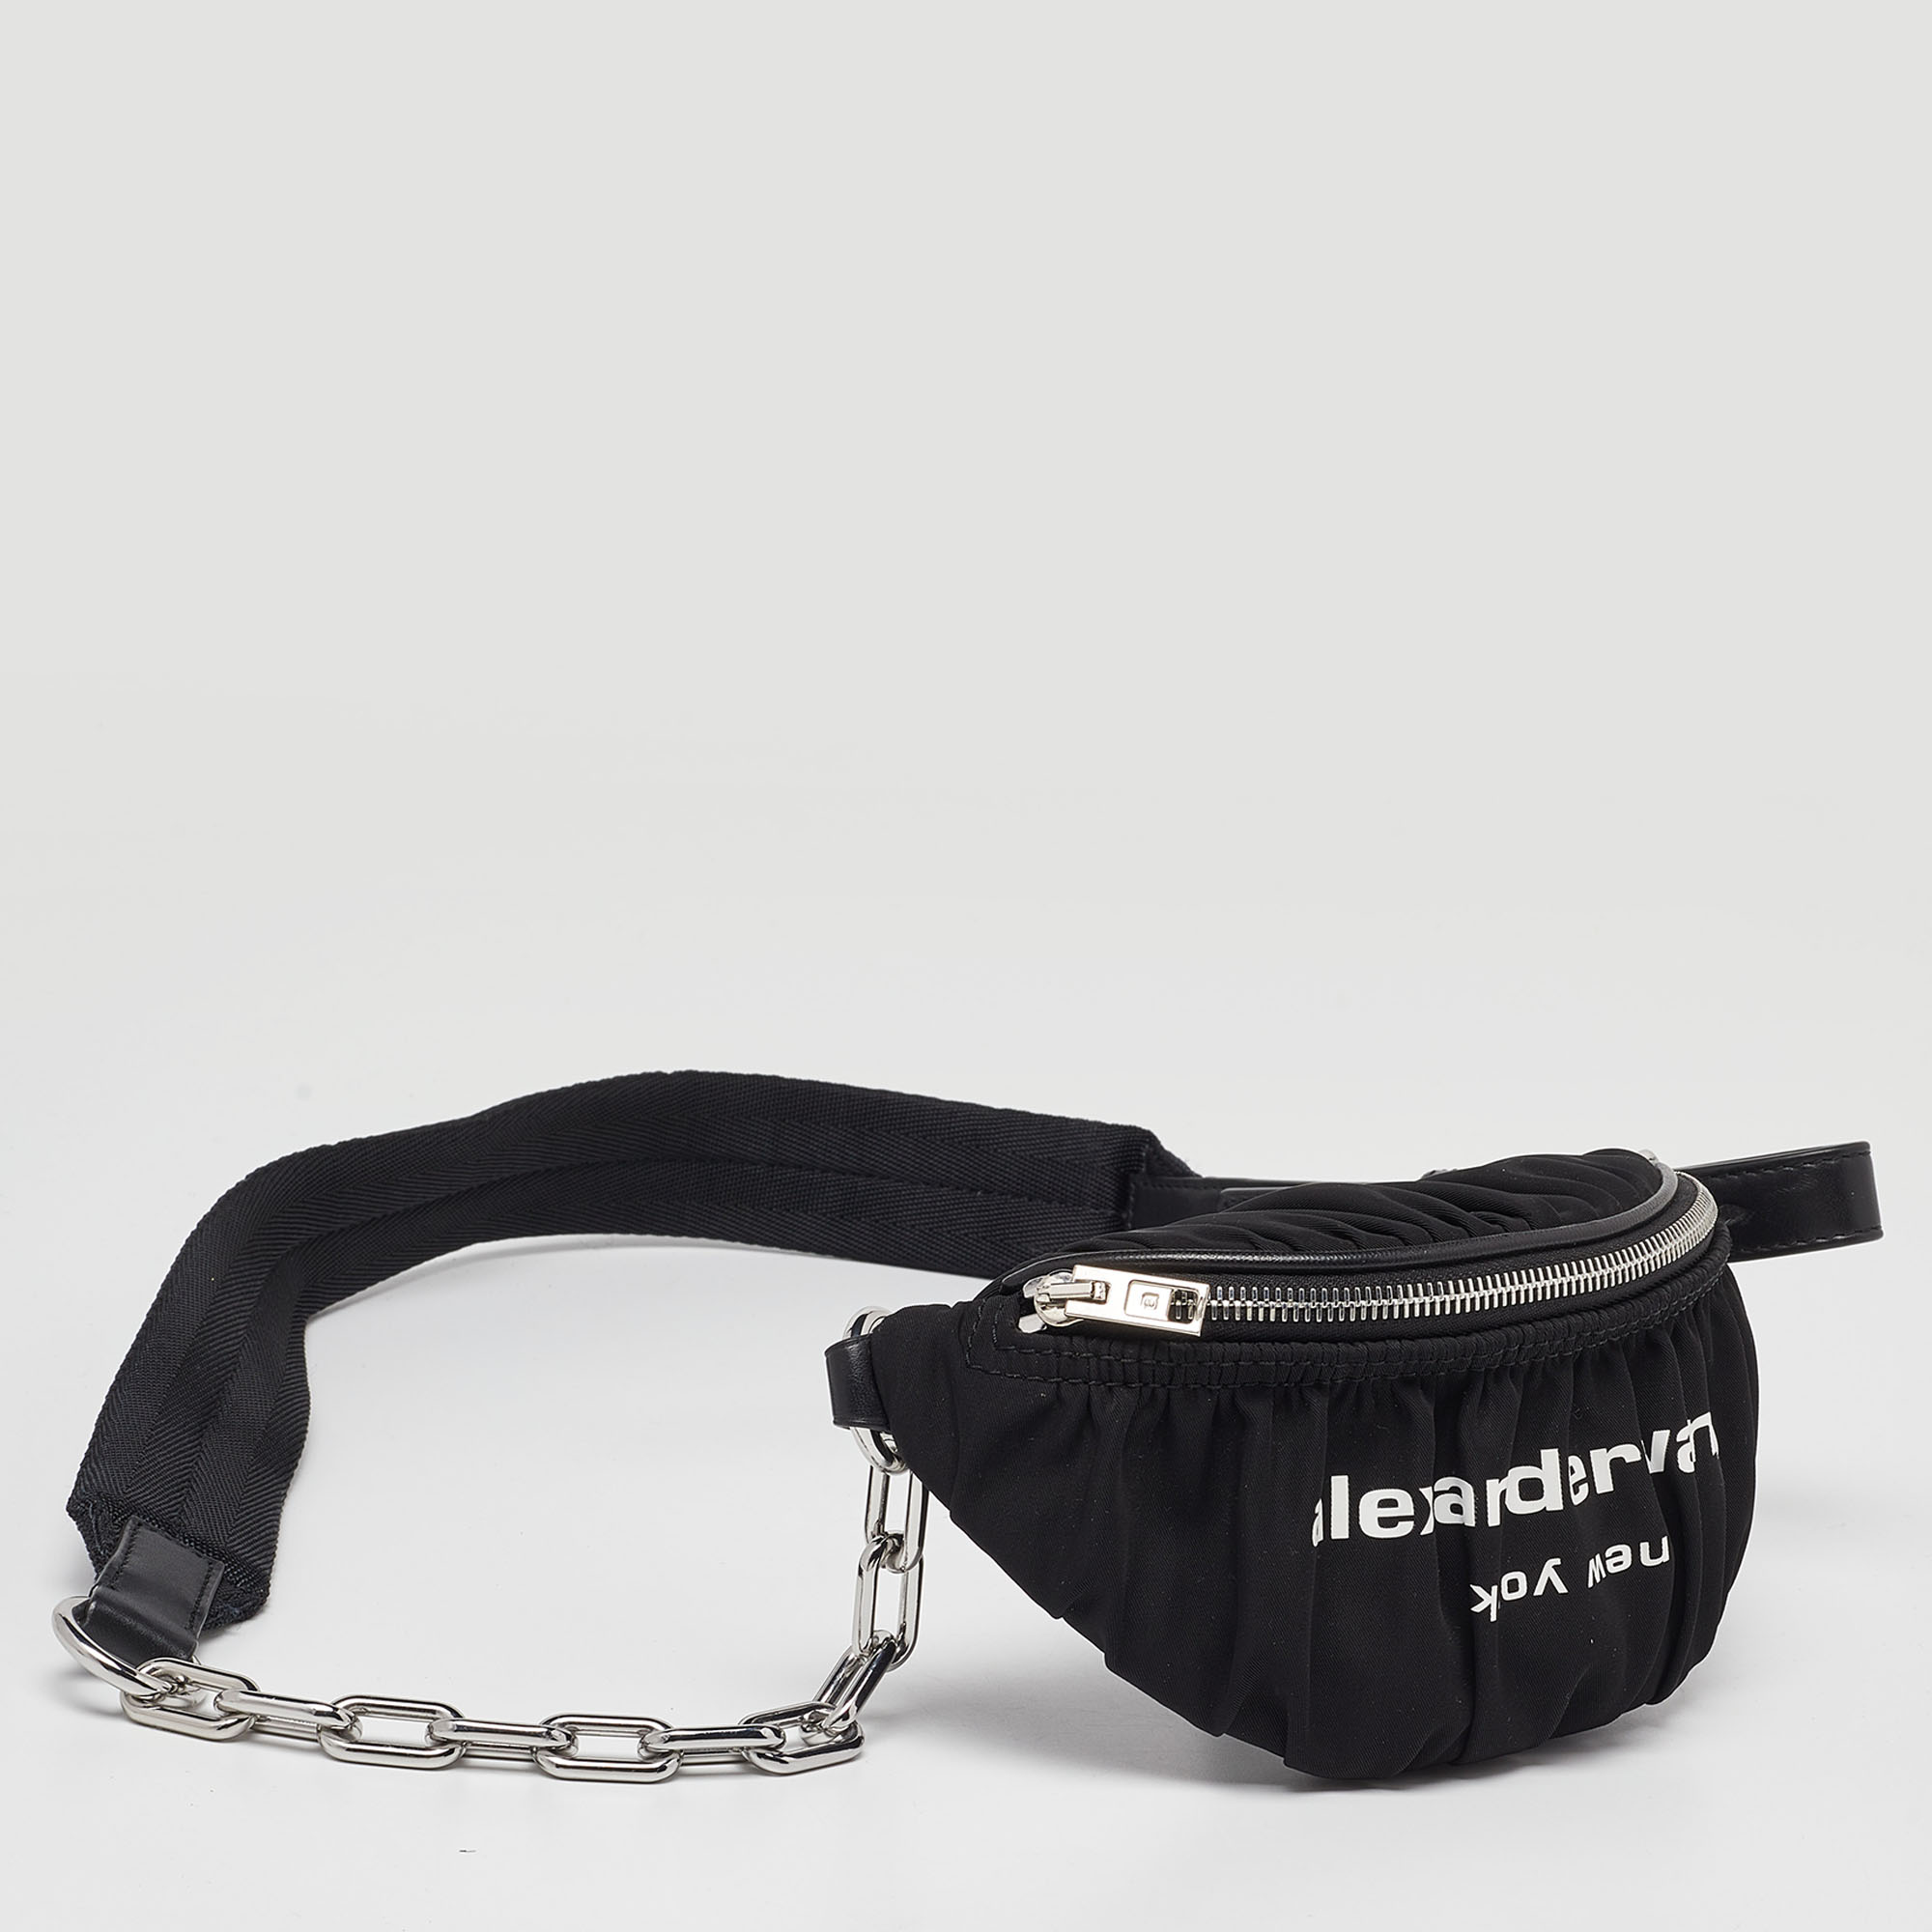 Alexander Wang Black Nylon And Leather Attica Ruched Belt Bag